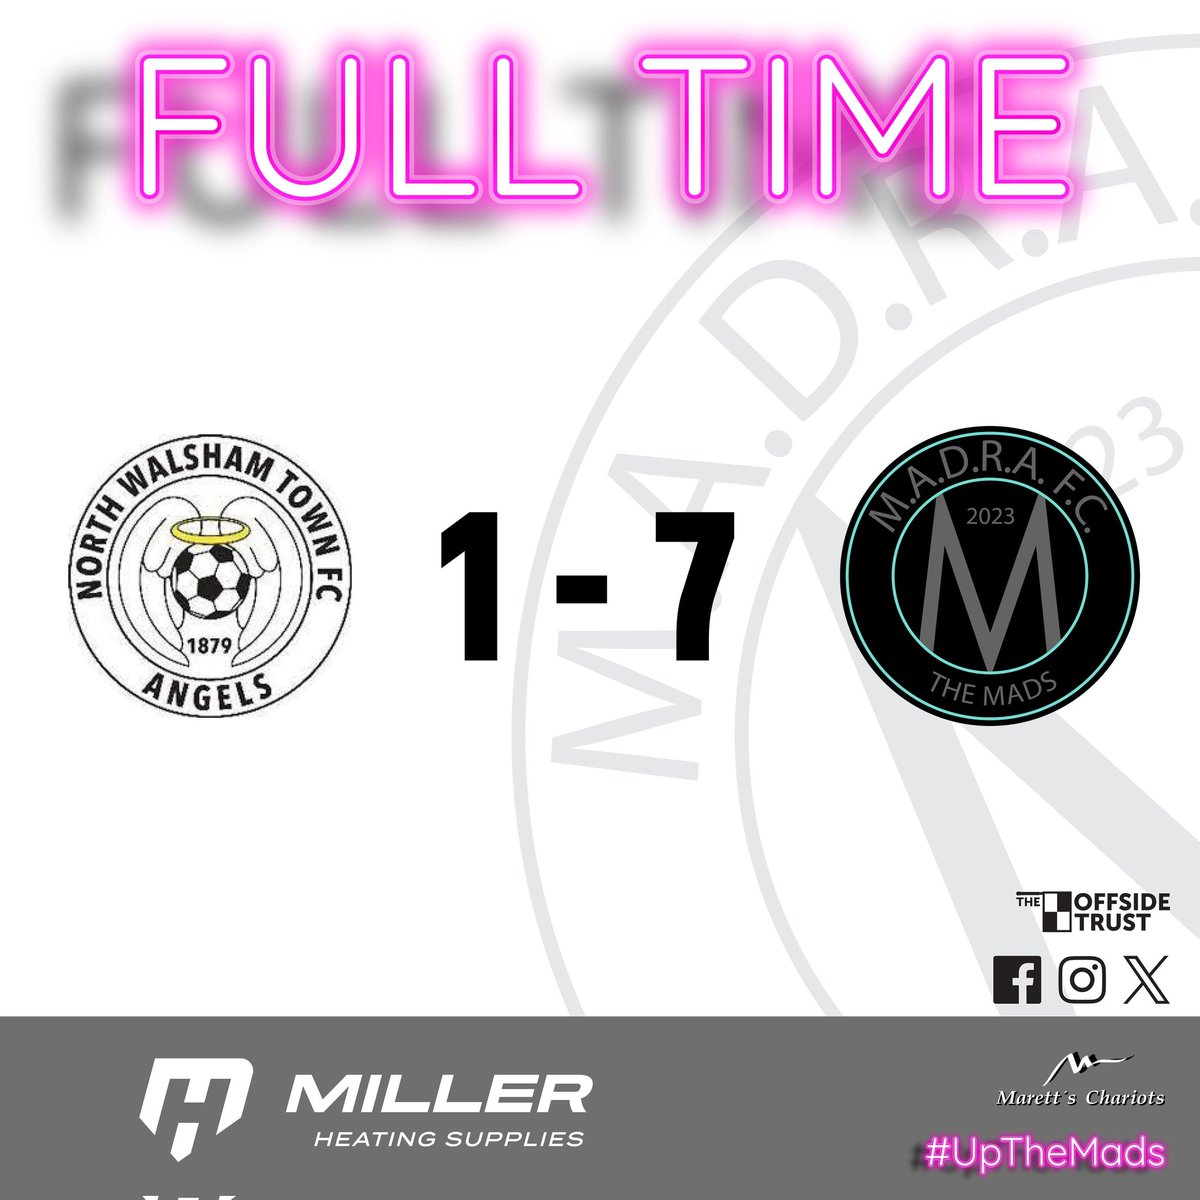 Ressies recover from an early slip up and get themsleves into their 2nd cup final 💪🩵🩷
#UpTheMads #WelcomeToTheMadhouse #Madness #TheMads #MadraFC #NorfolkFootball #OneStepBeyond